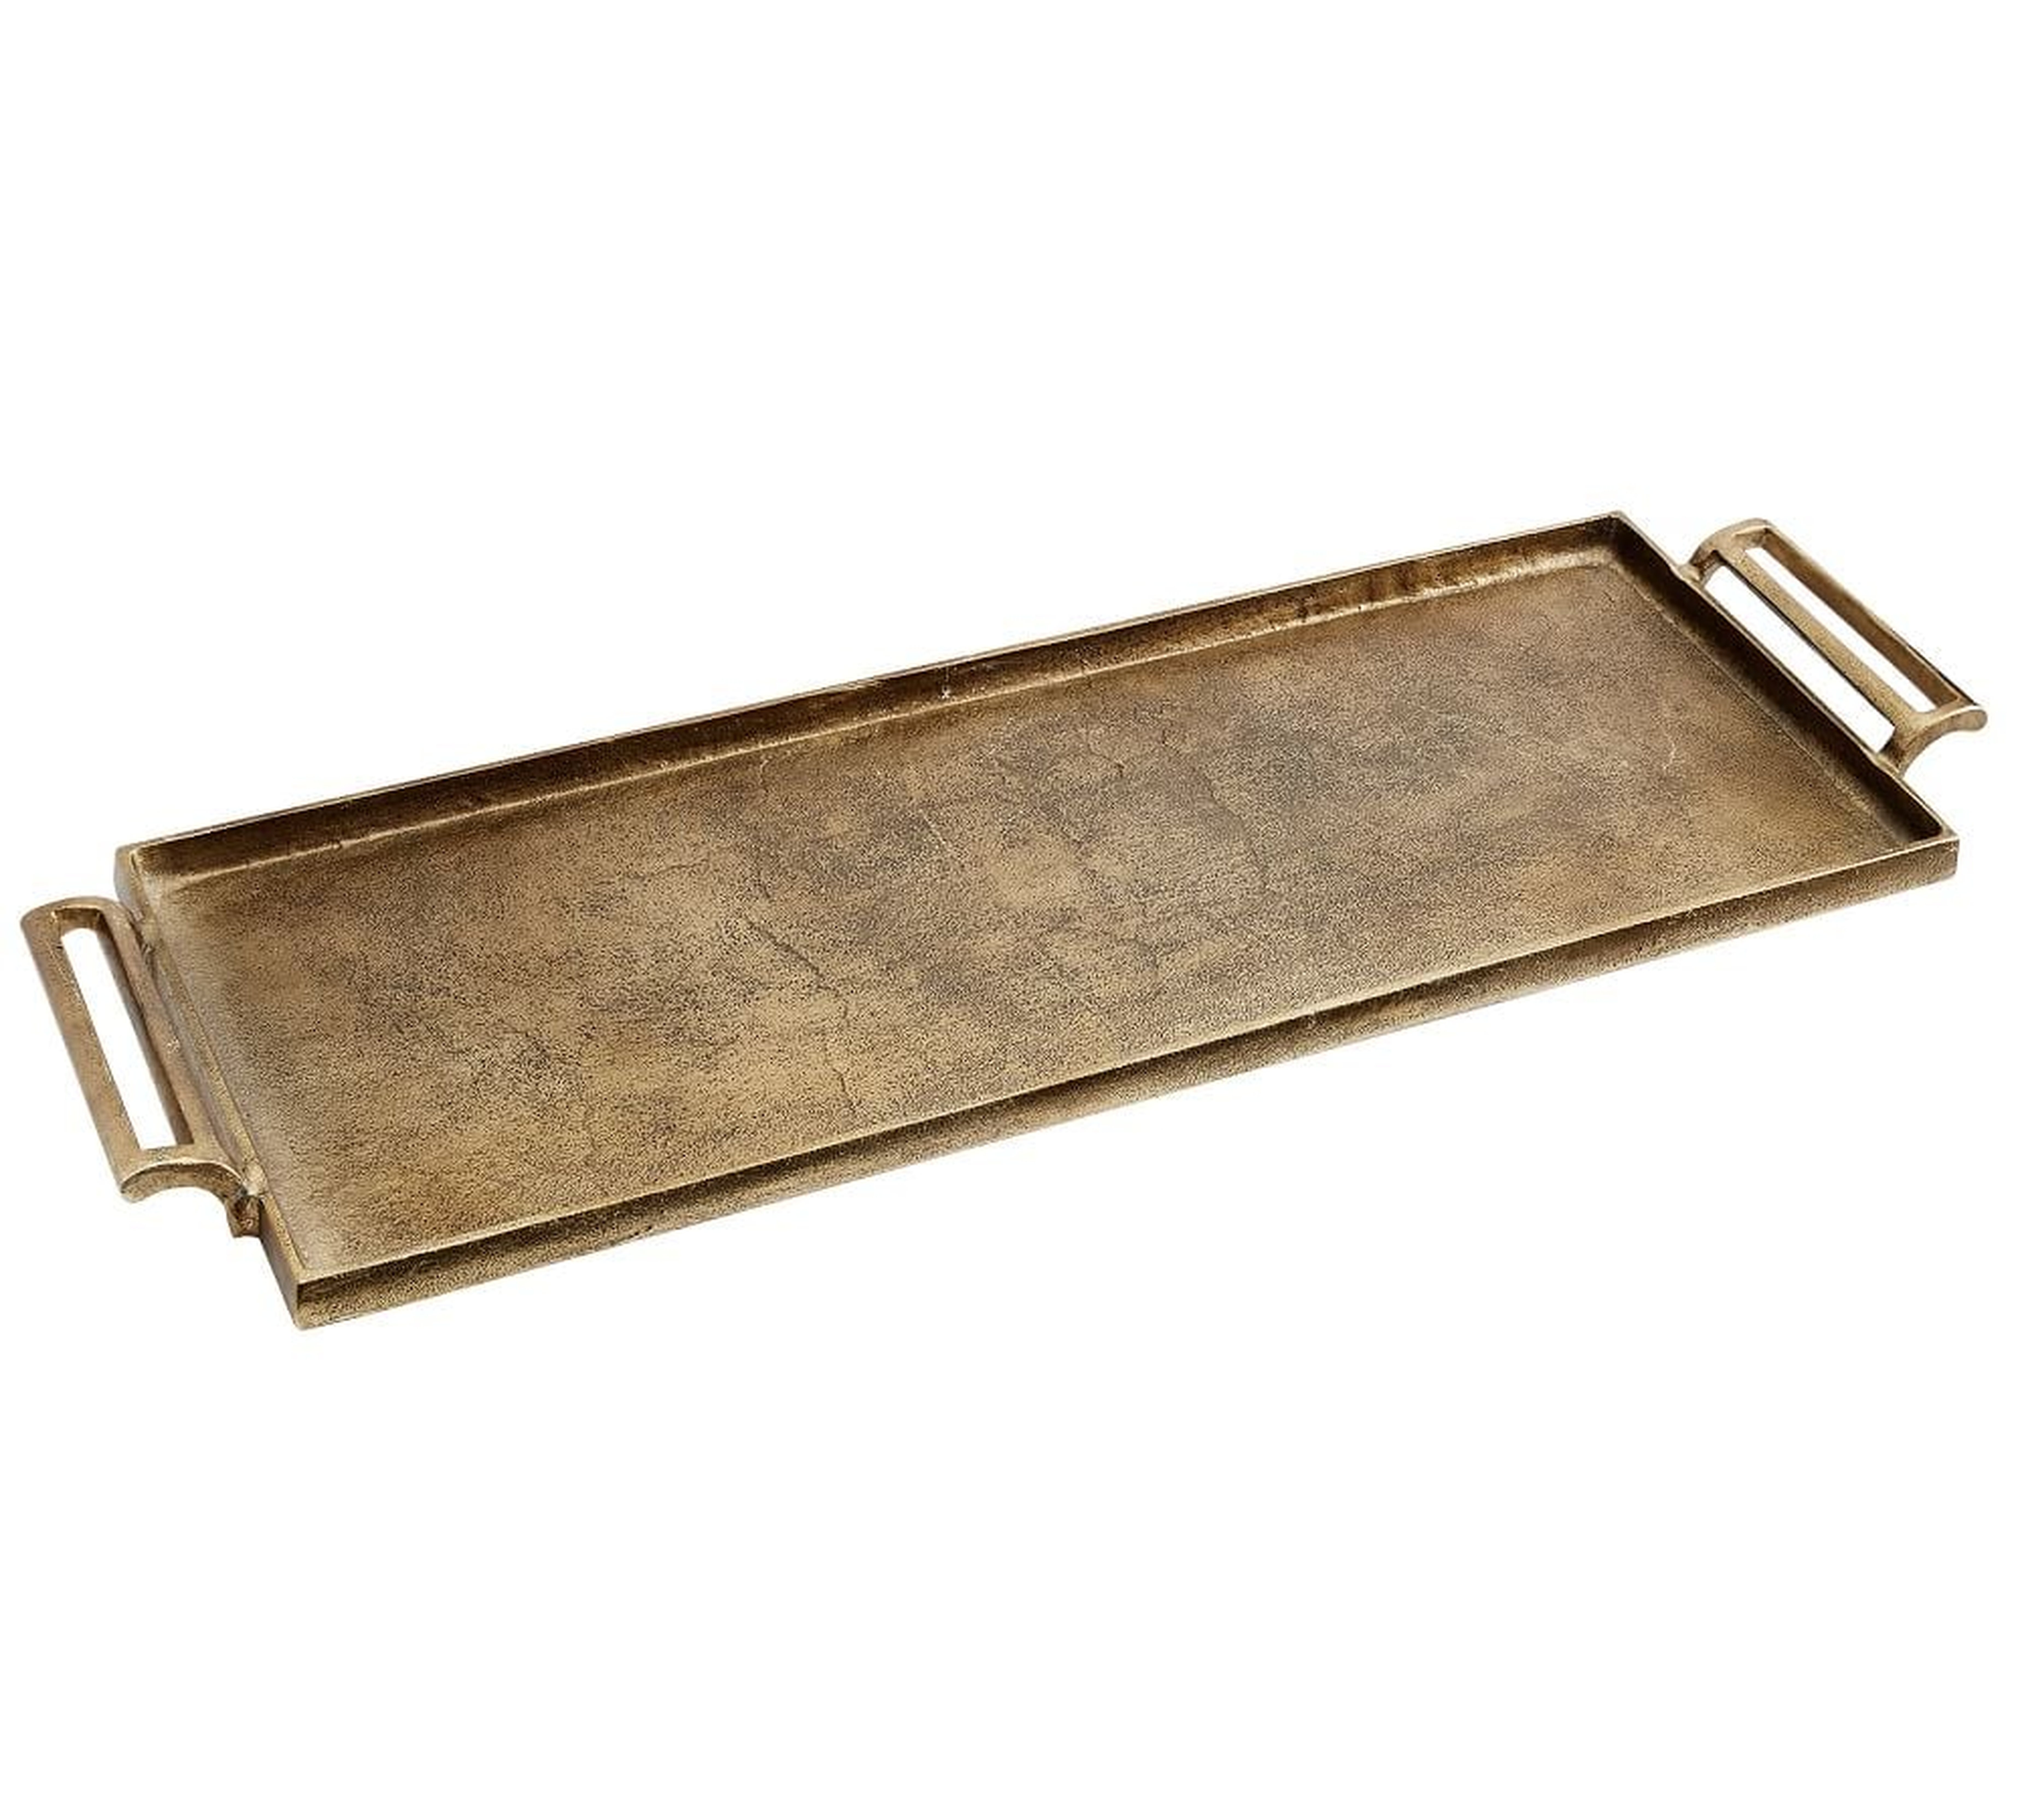 Odin Accessories, Tray, Antique Gold - Pottery Barn